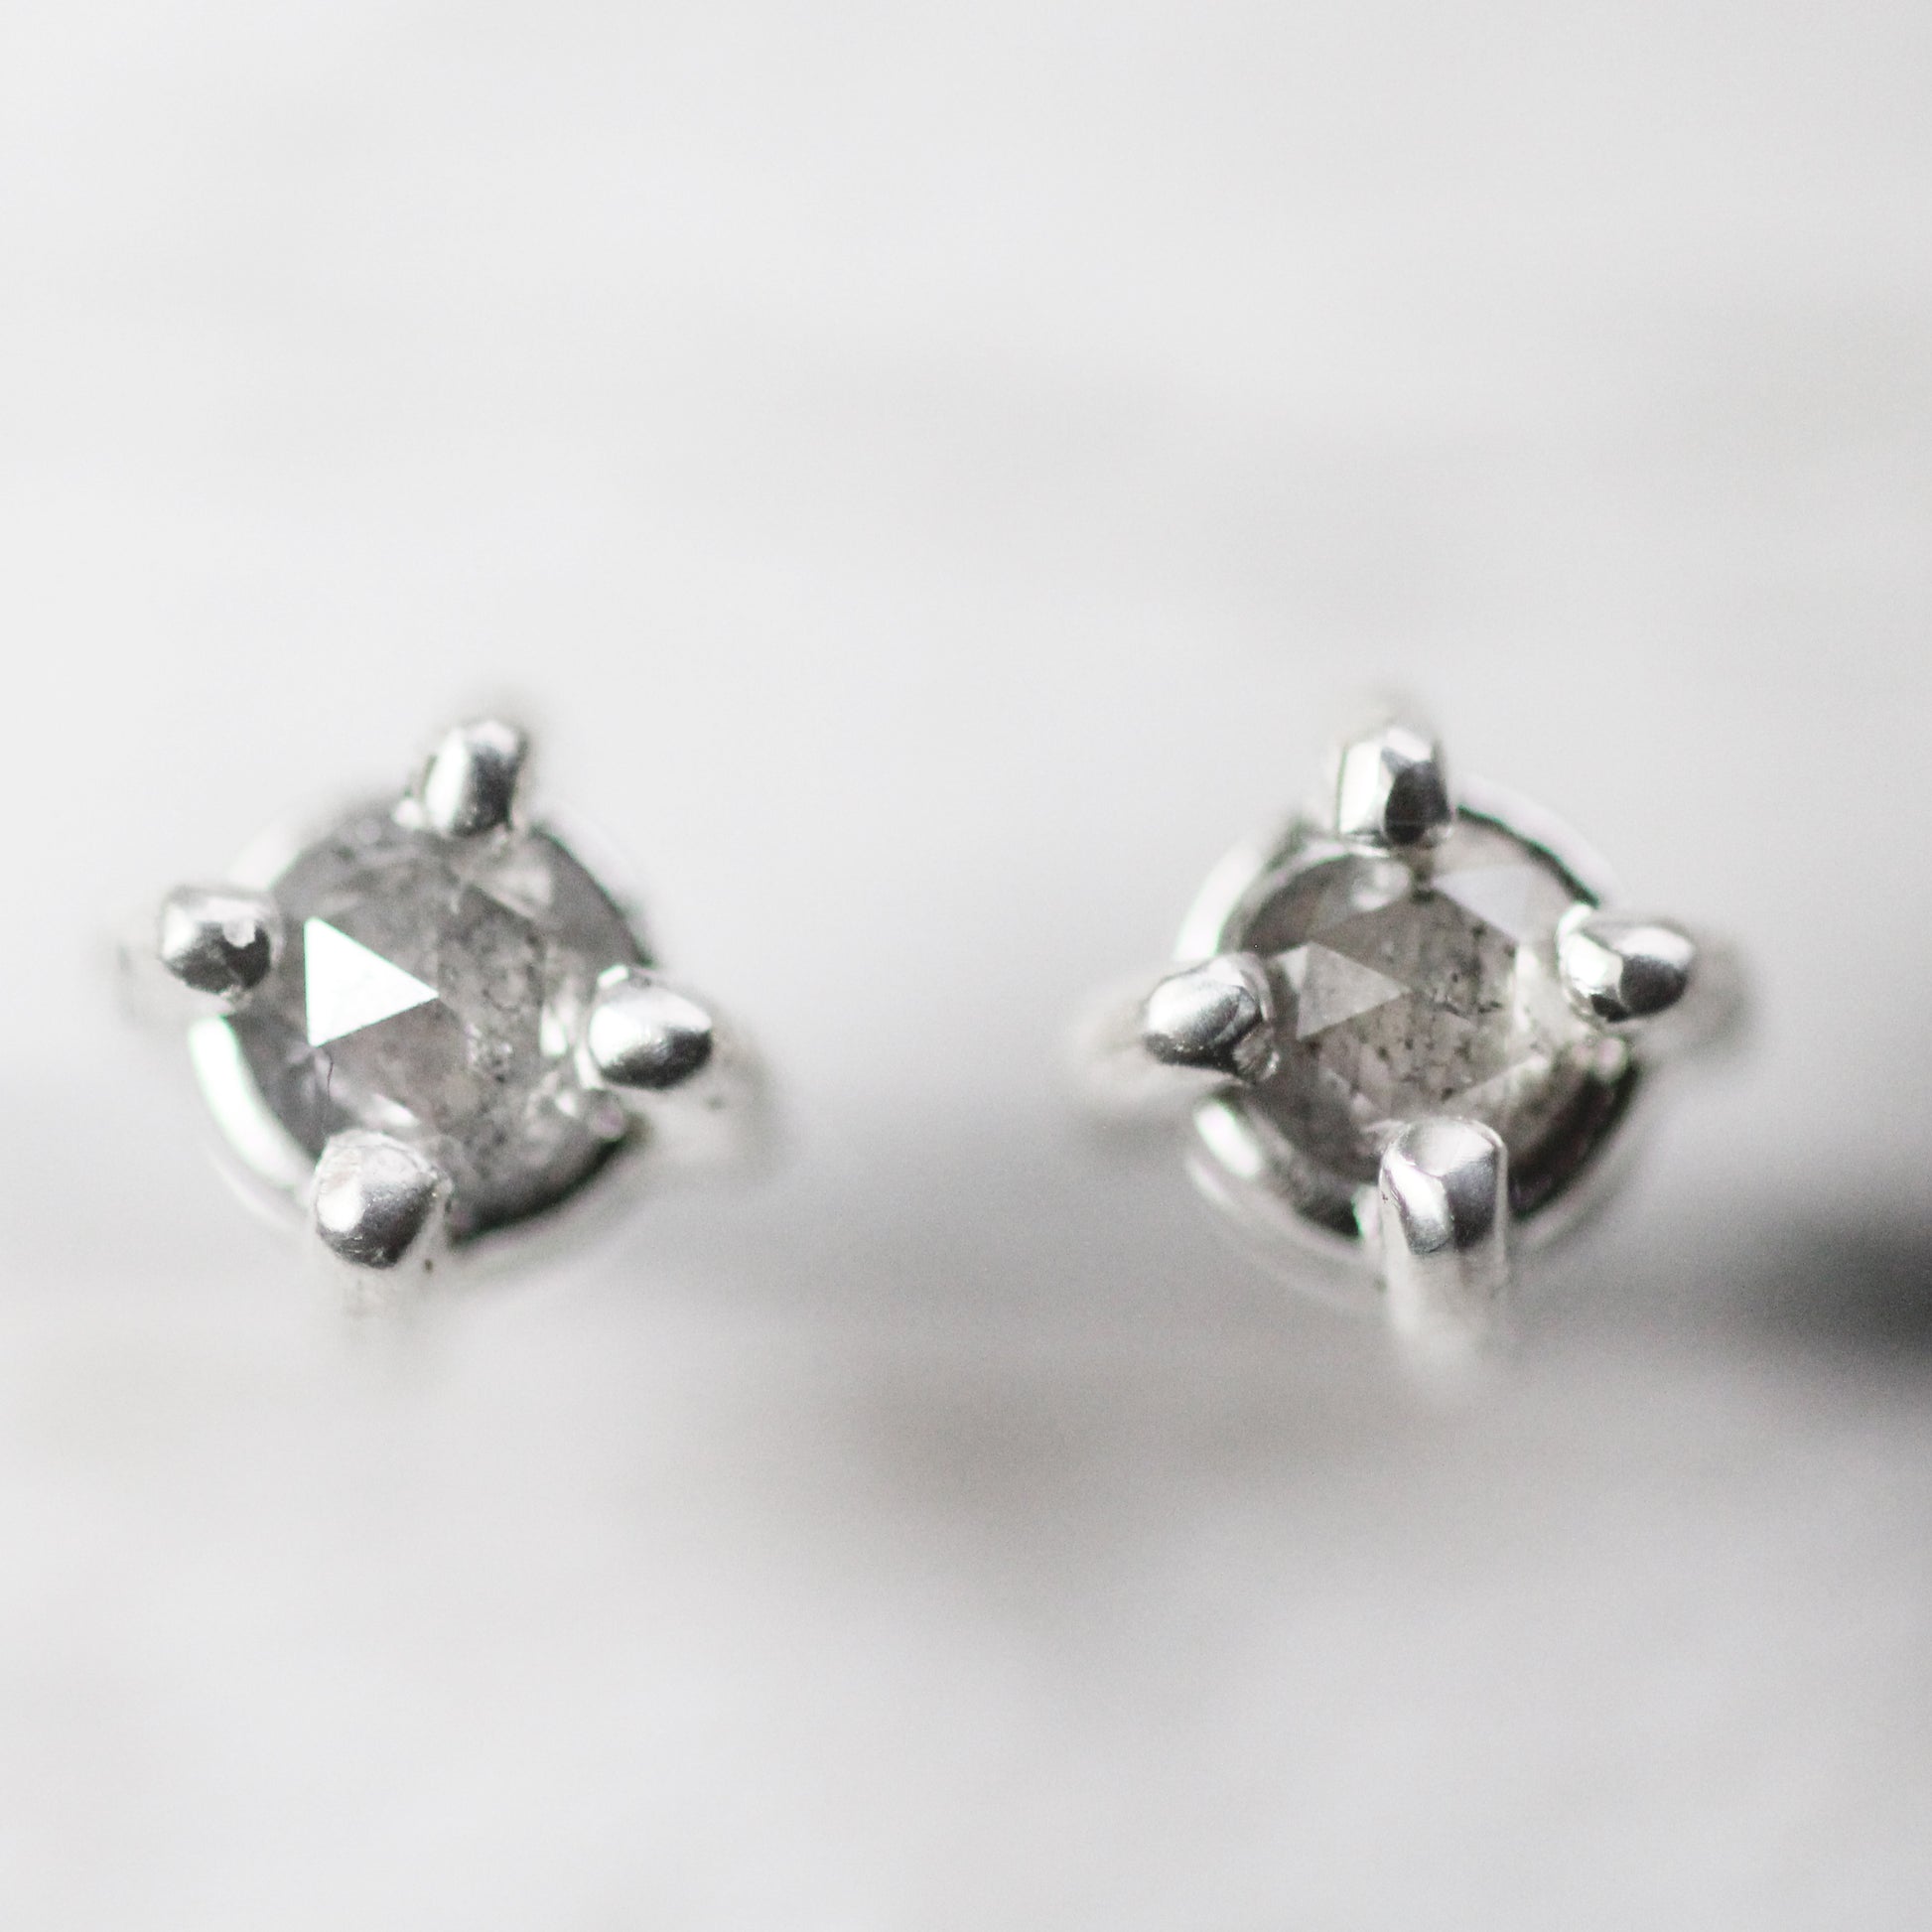 0.50 ct Salt and Pepper Diamond Earrings Rose Gold Grey Diamond Studs 14K Yellow Gold - Made to Order